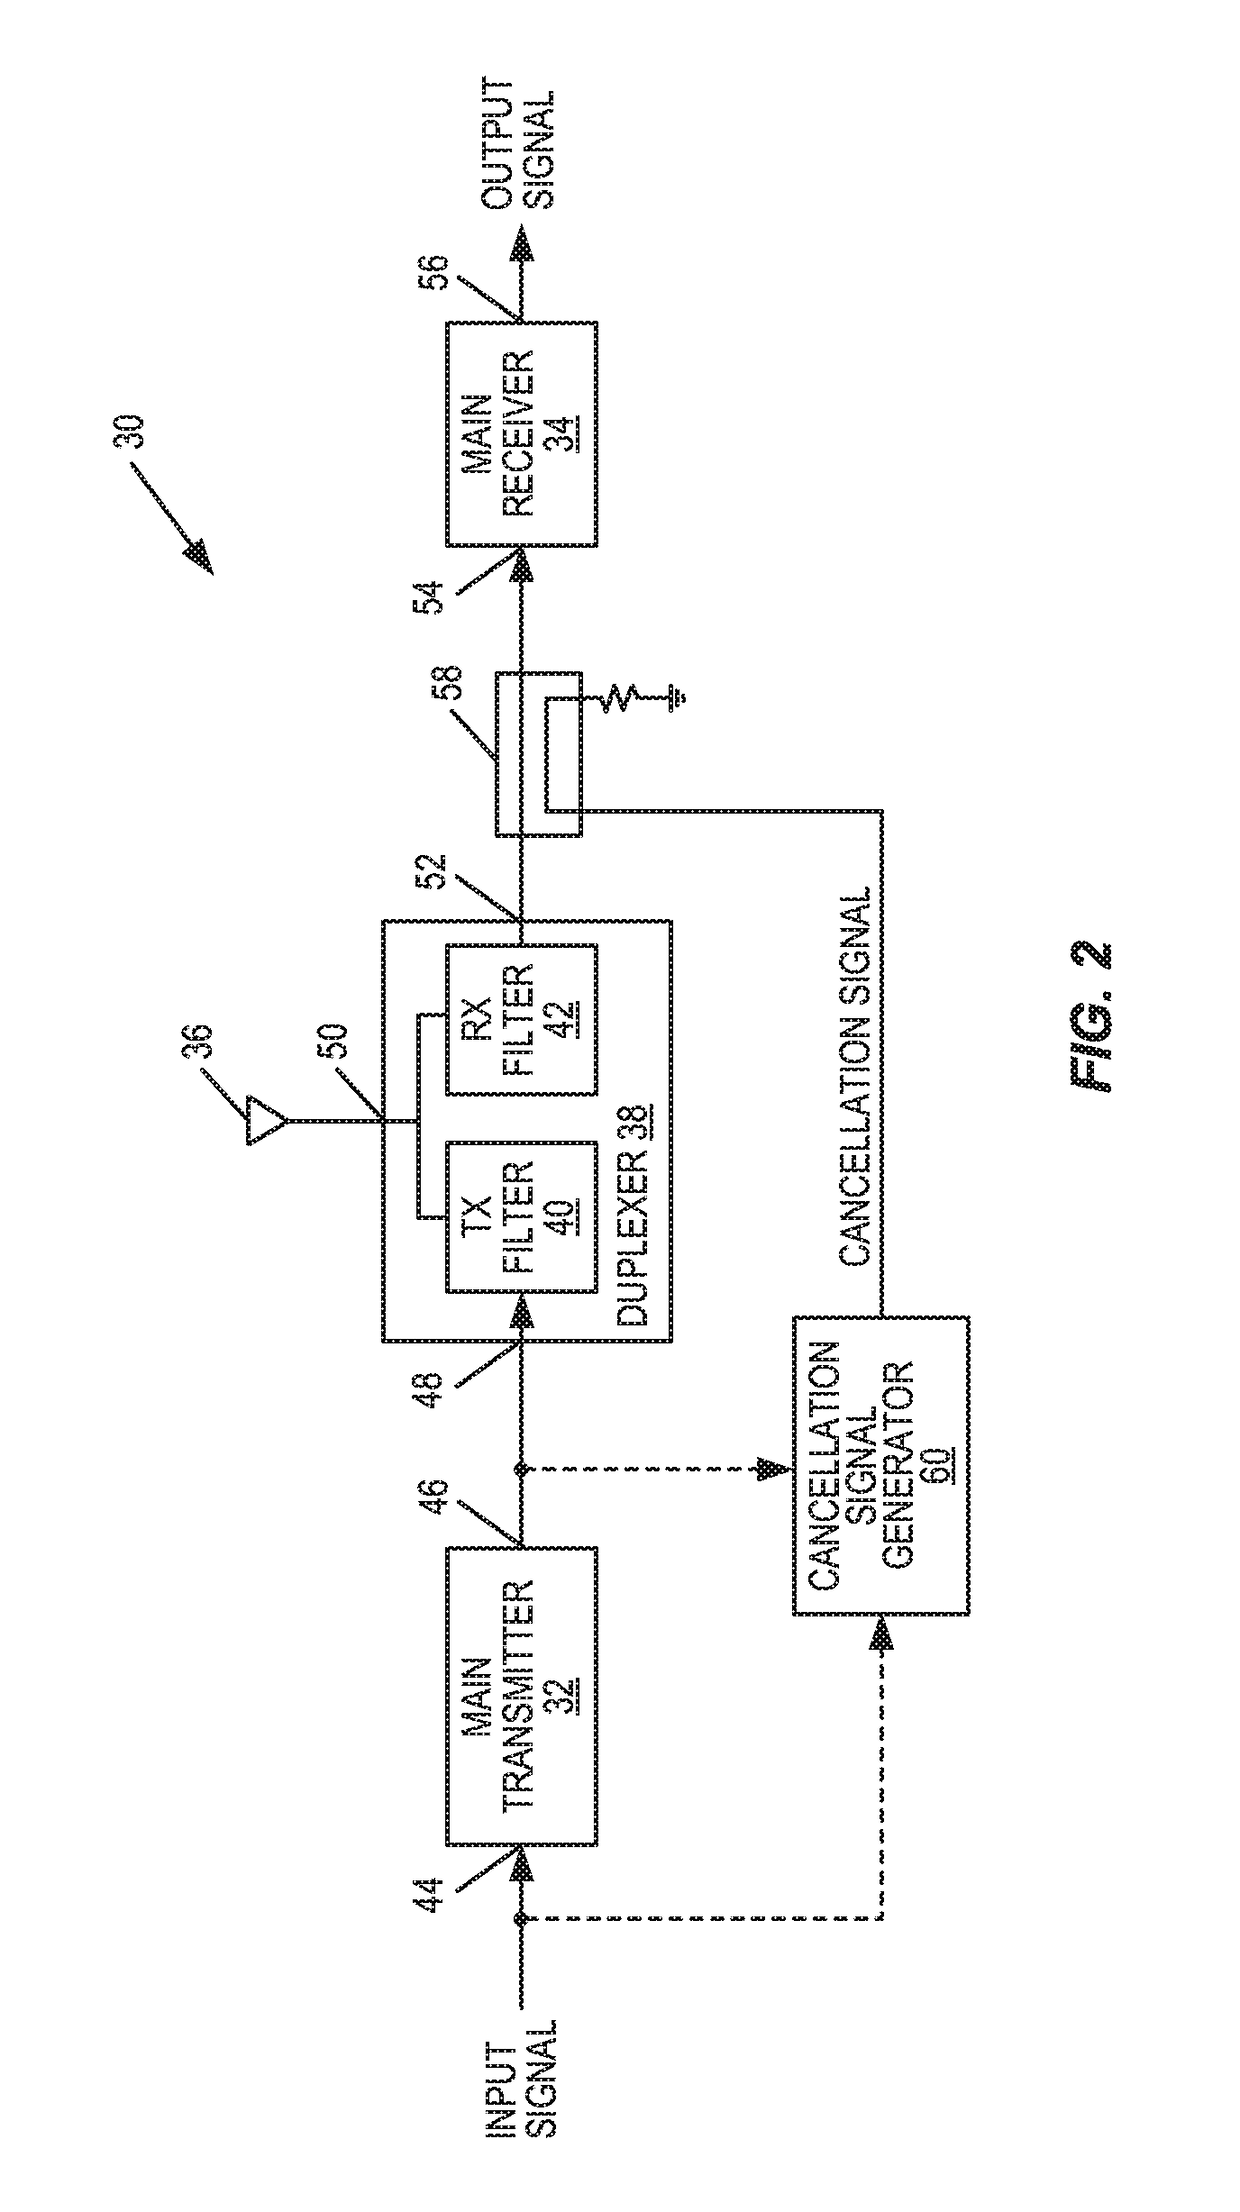 Active cancellation of transmitter leakage in a radio receiver